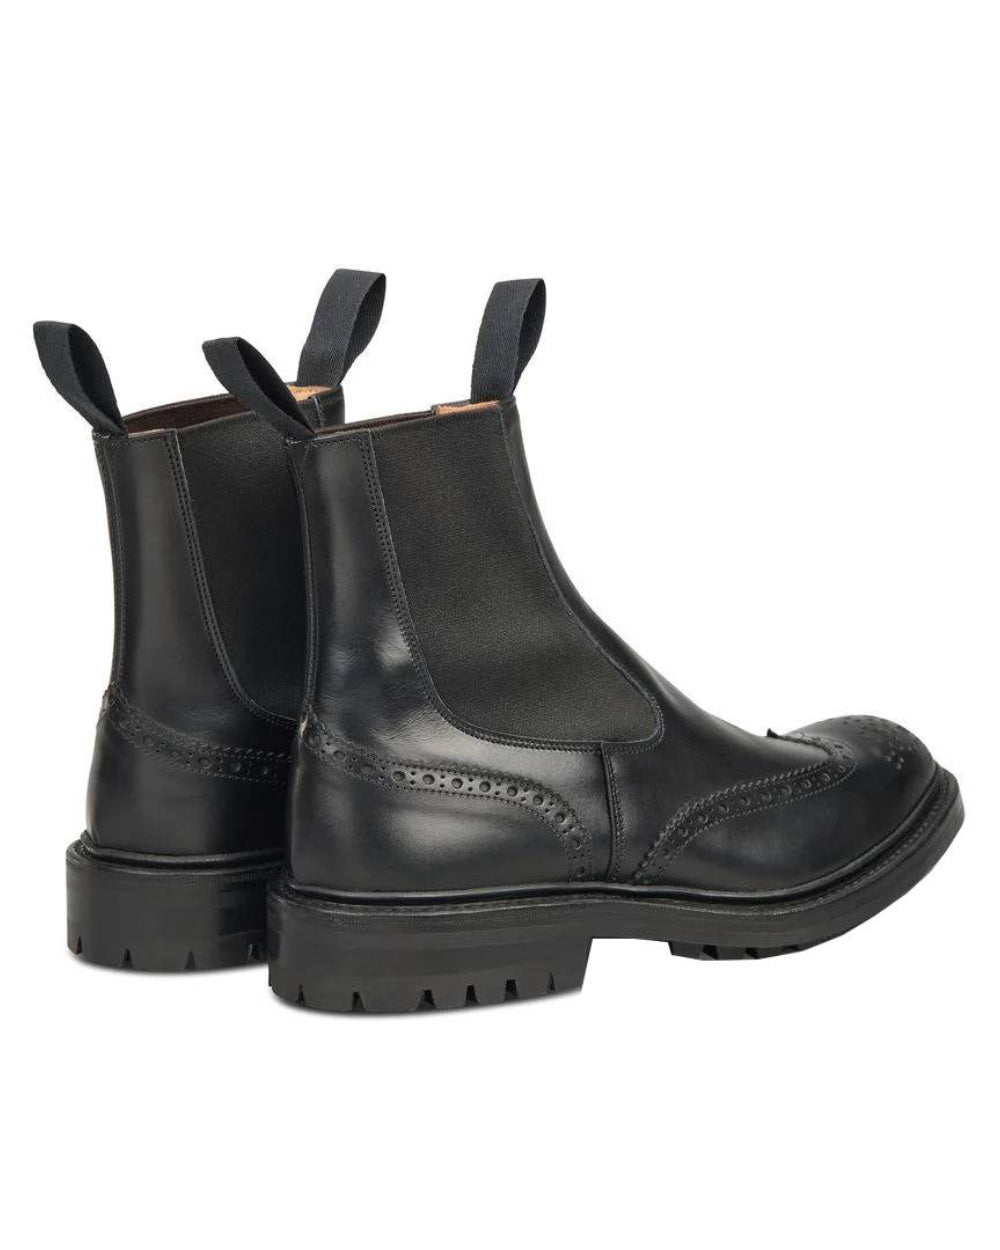 Black Coloured Trickers Henry Commando Sole Country Dealer Boot On A White Background 